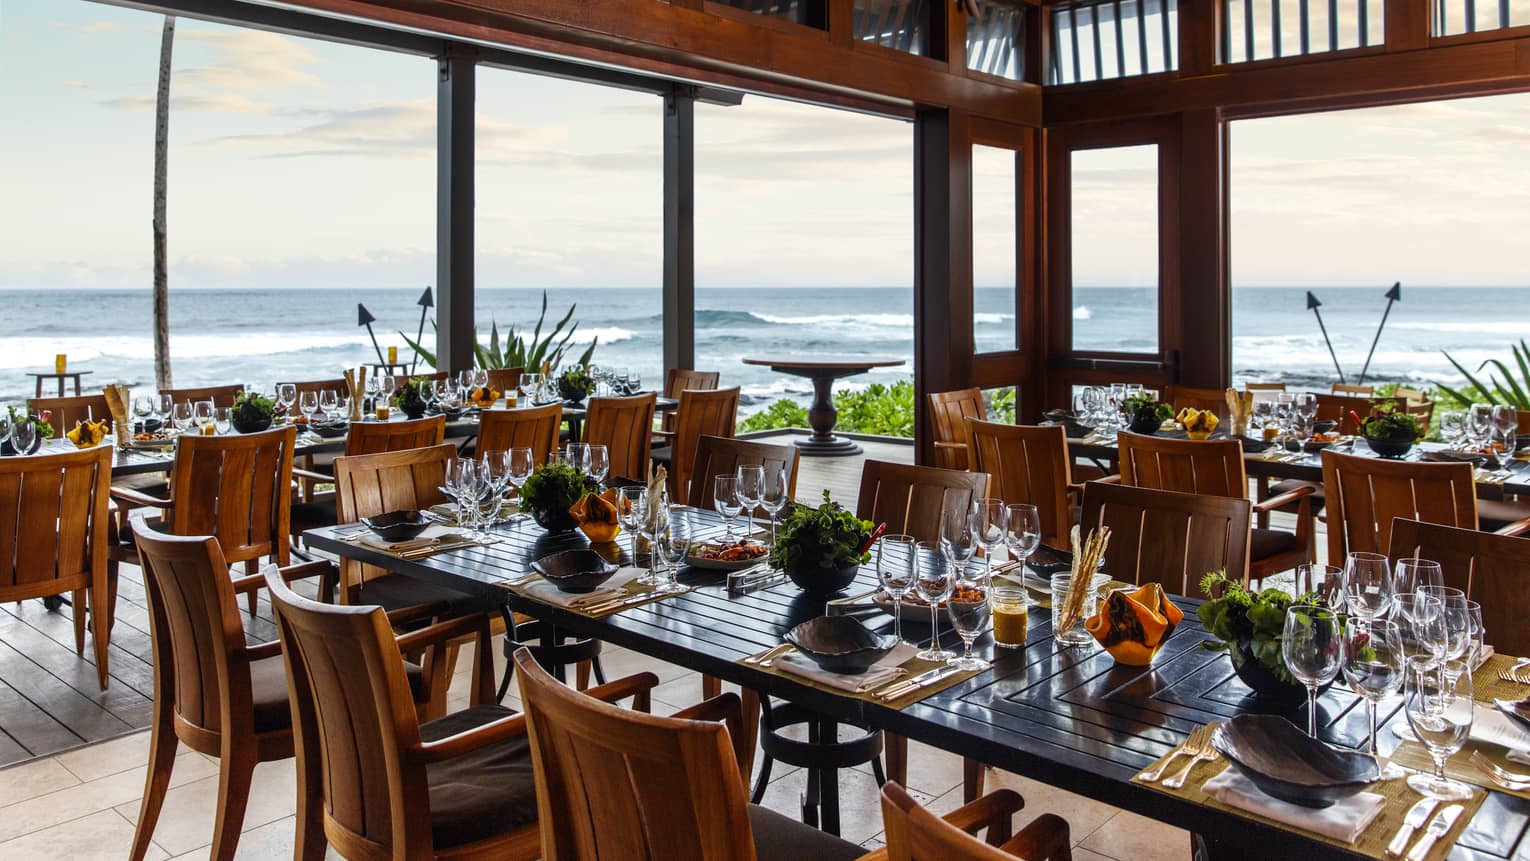 Restaurant dining tables under wood awning in open air room overlooking ocean